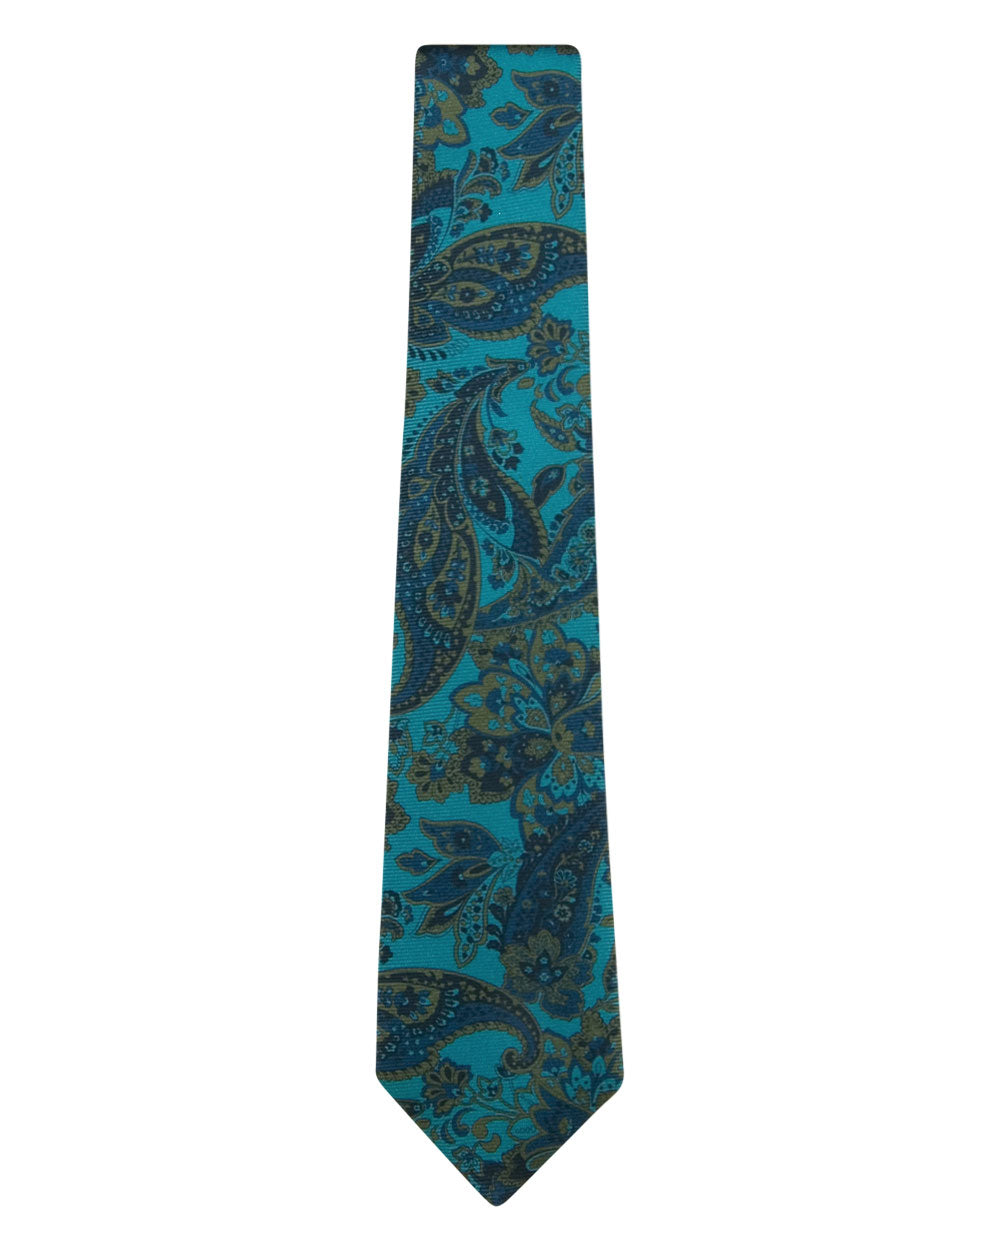 Teal and Blue Large Paisley Tie